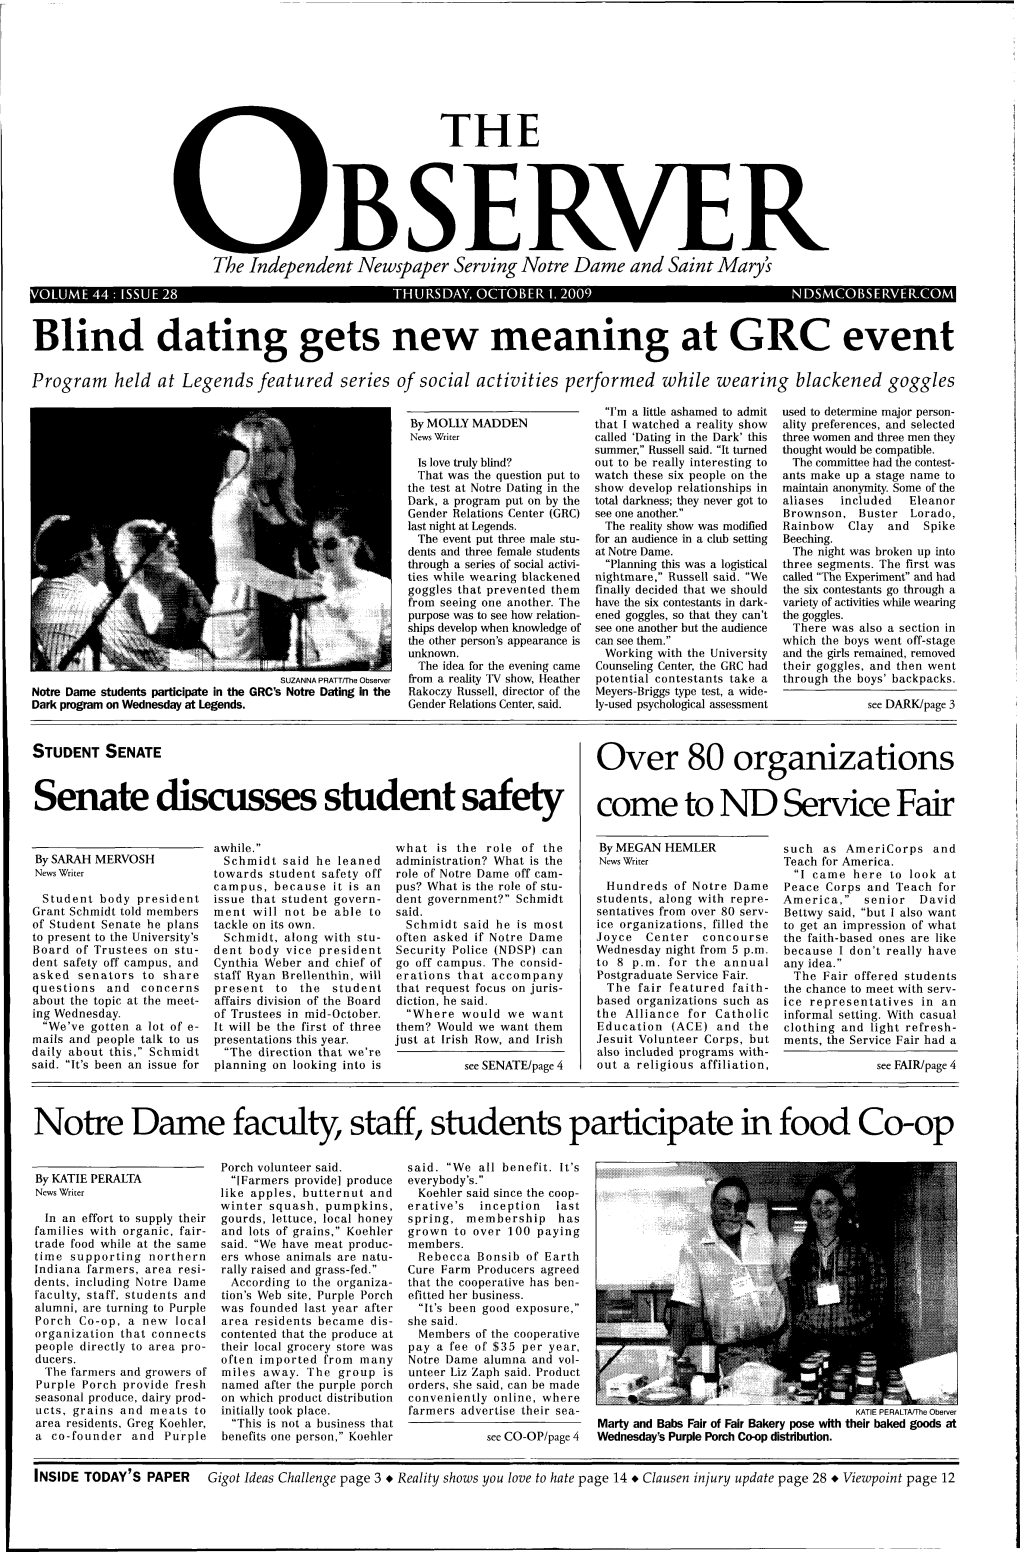 Blind Dating Gets New Meaning at GRC Event Senate Discusses